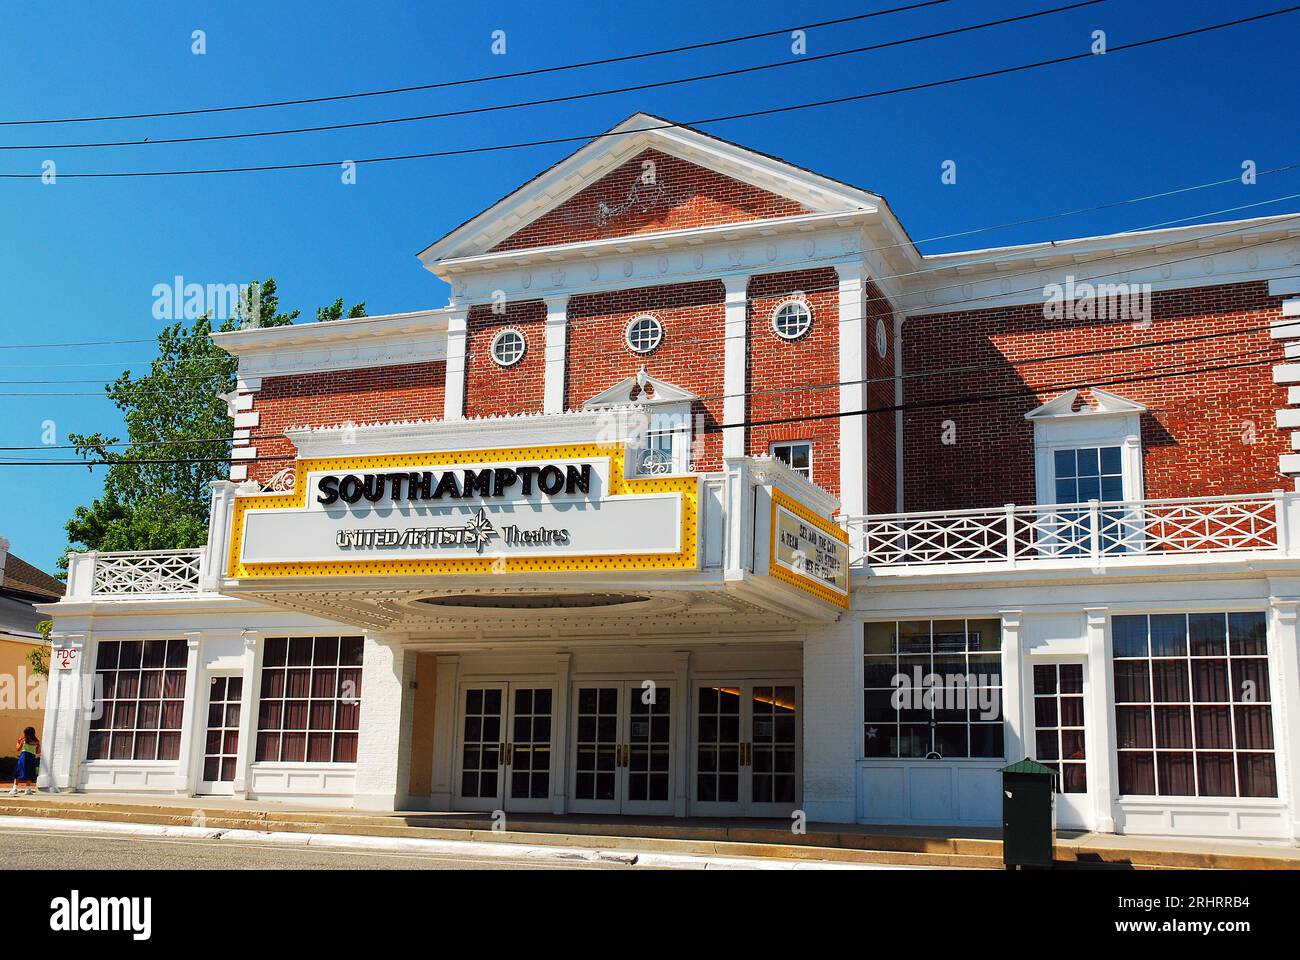 The Southampton movie theater remains in its historic building and continues to show first run films and cinema Stock Photo